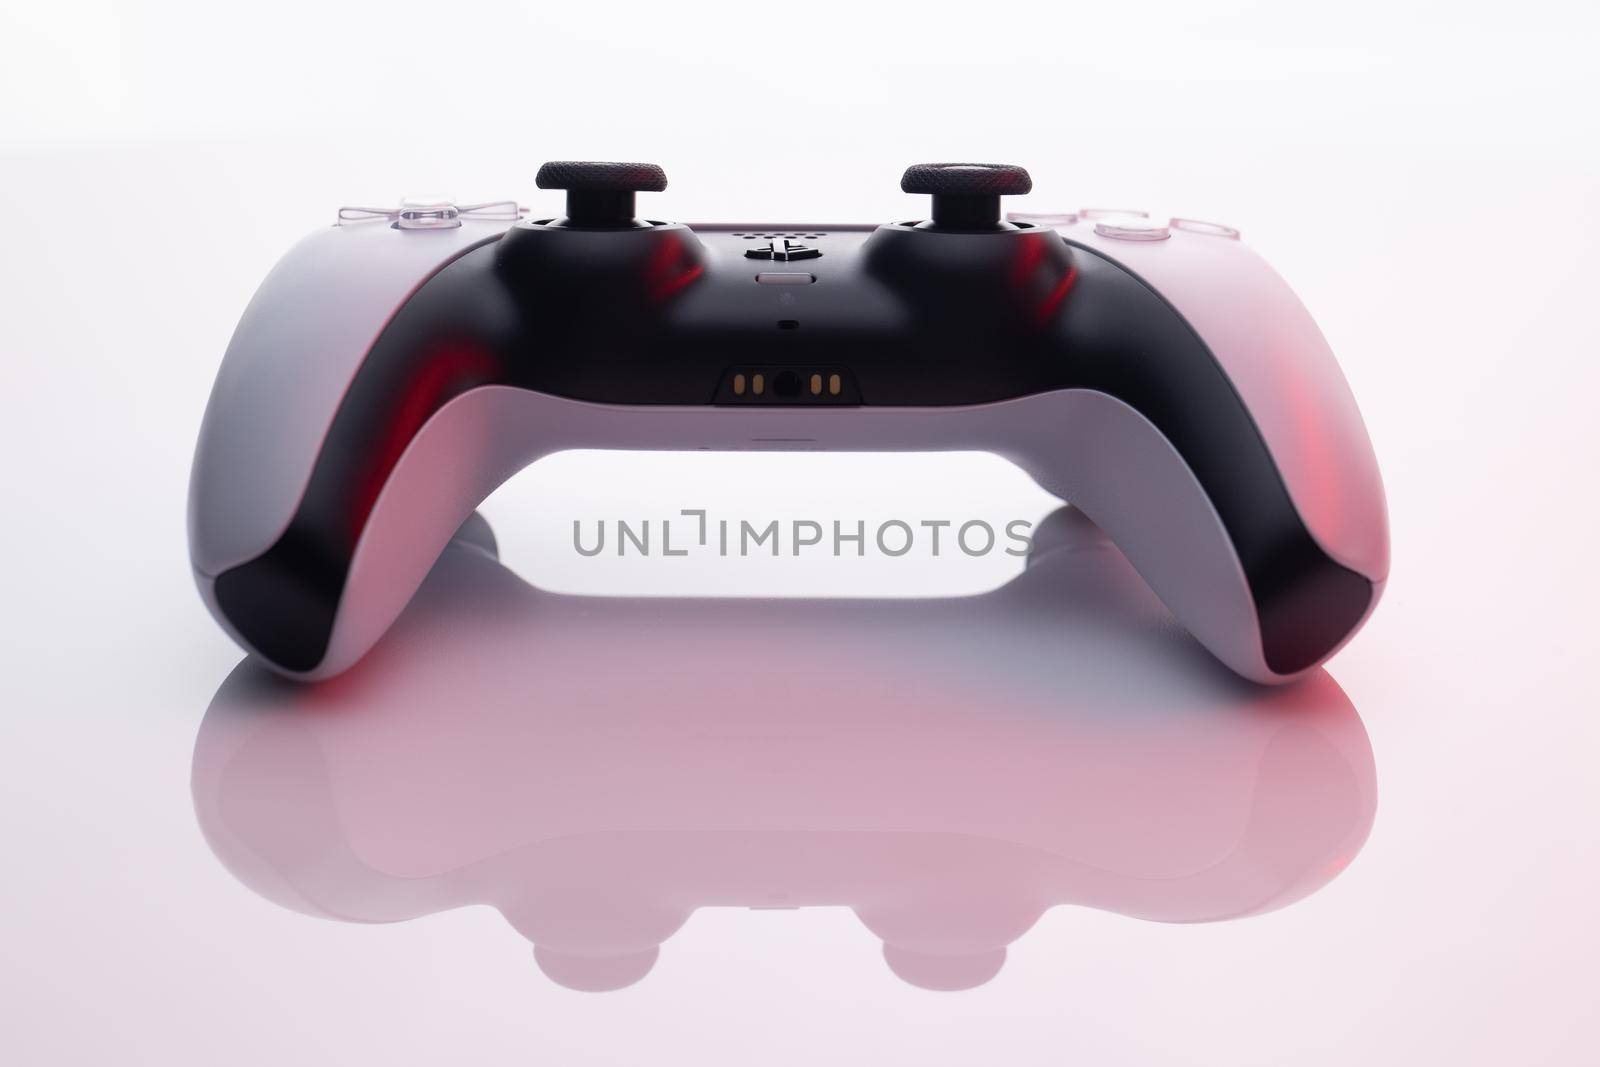 Kiev, Ukraine - January 1 2021: Sony Playstation 5 Dualsense game controller on a white background. New product from Sony, wireless white PlayStation 5.